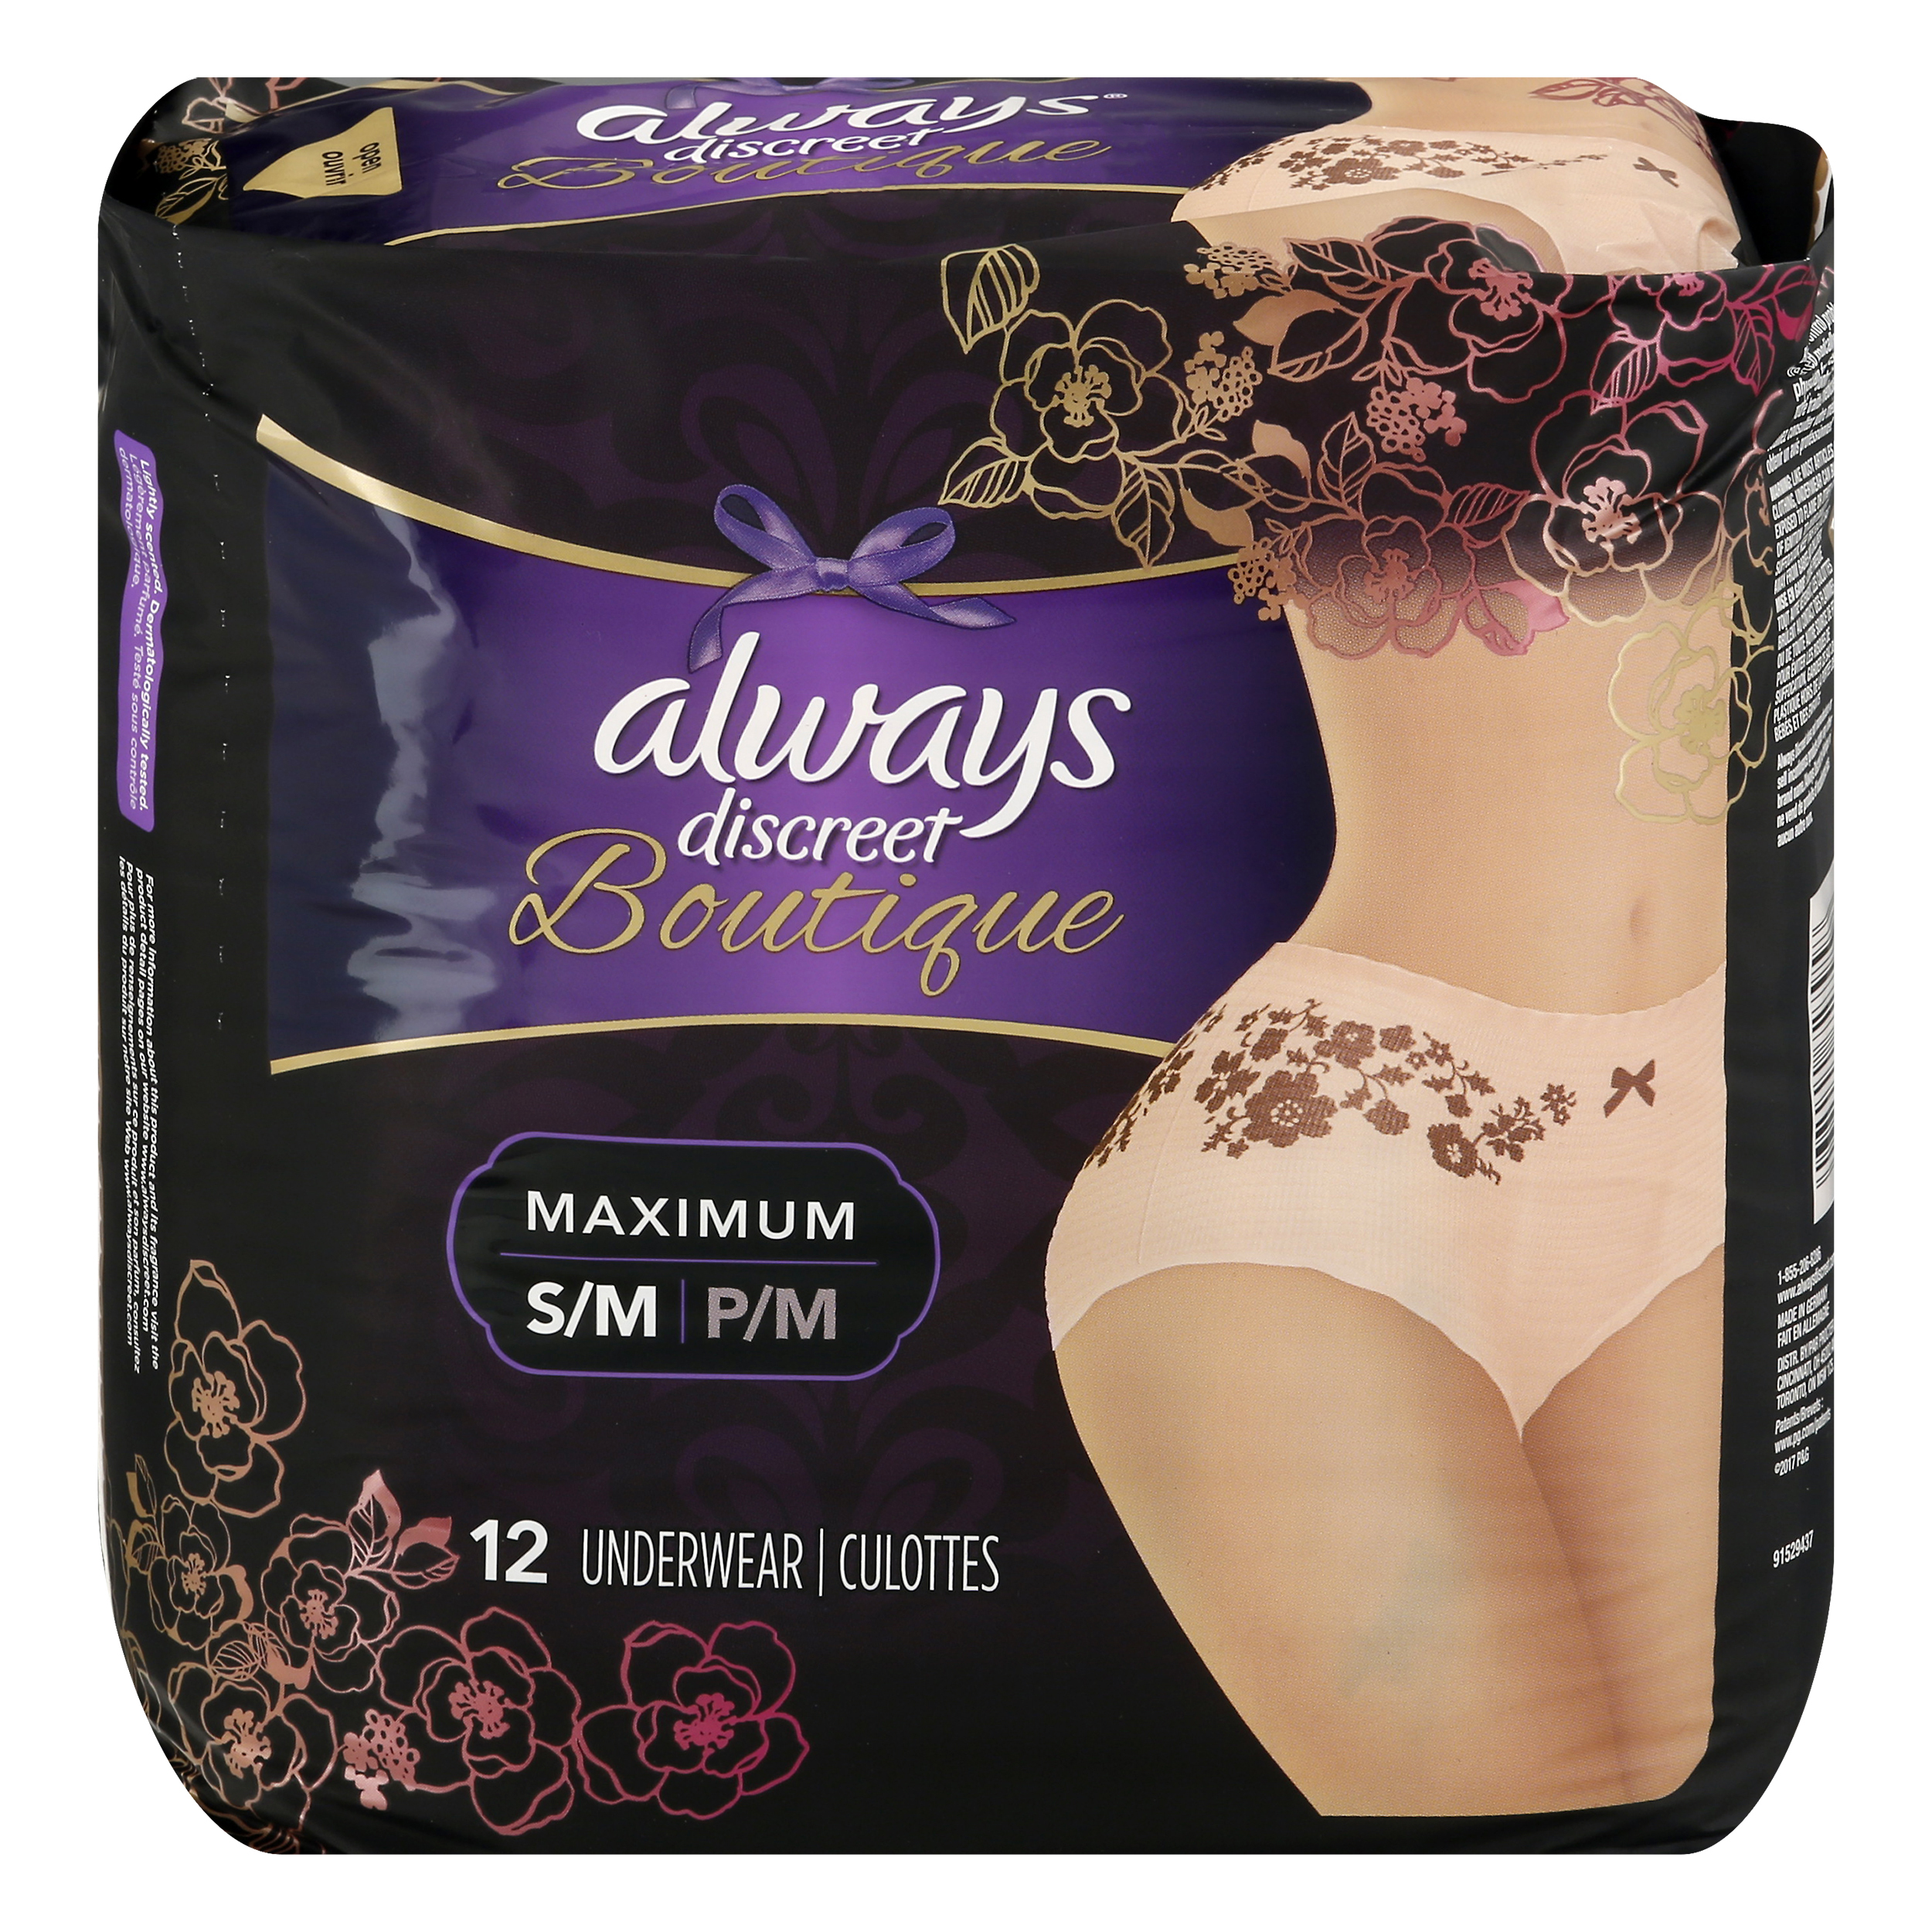 Mosers Foods : Always Discreet Boutique Maximum Protection S/M